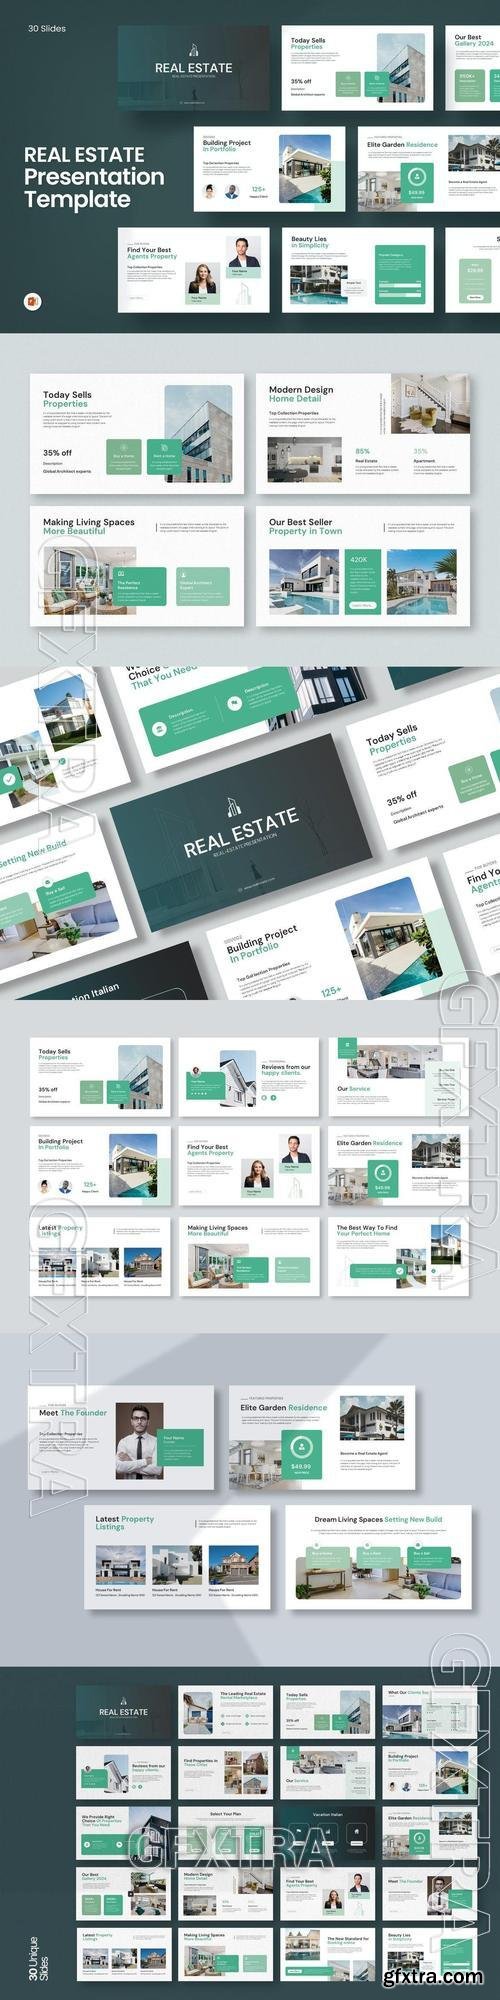 Real-Estate PowerPoint Presentation Template EA9VPGQ